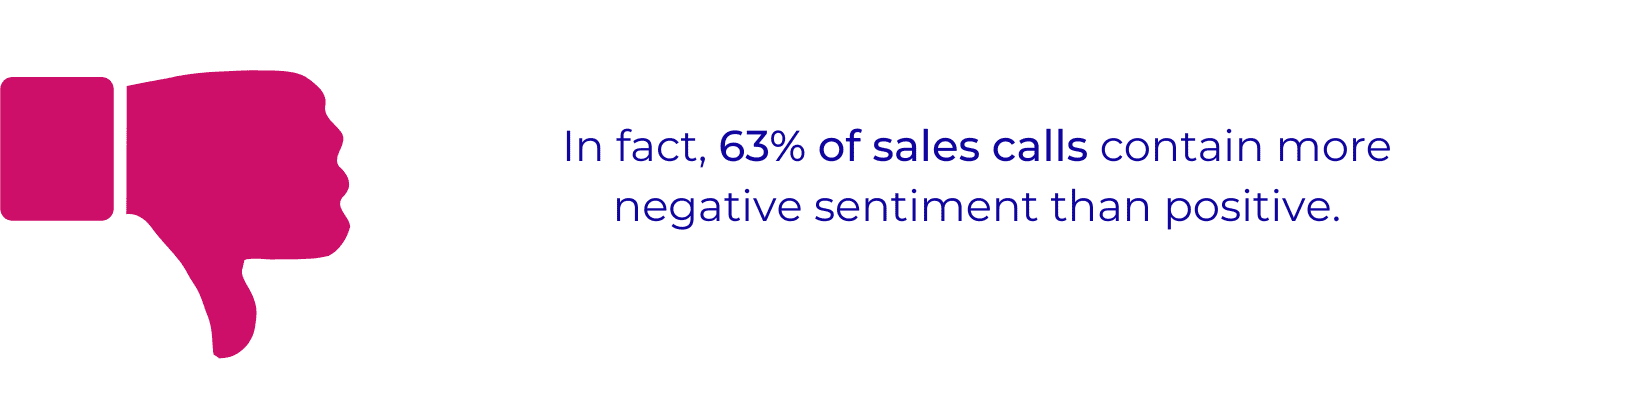 In fact, 63% of sales calls contain more negative sentiment than positive.